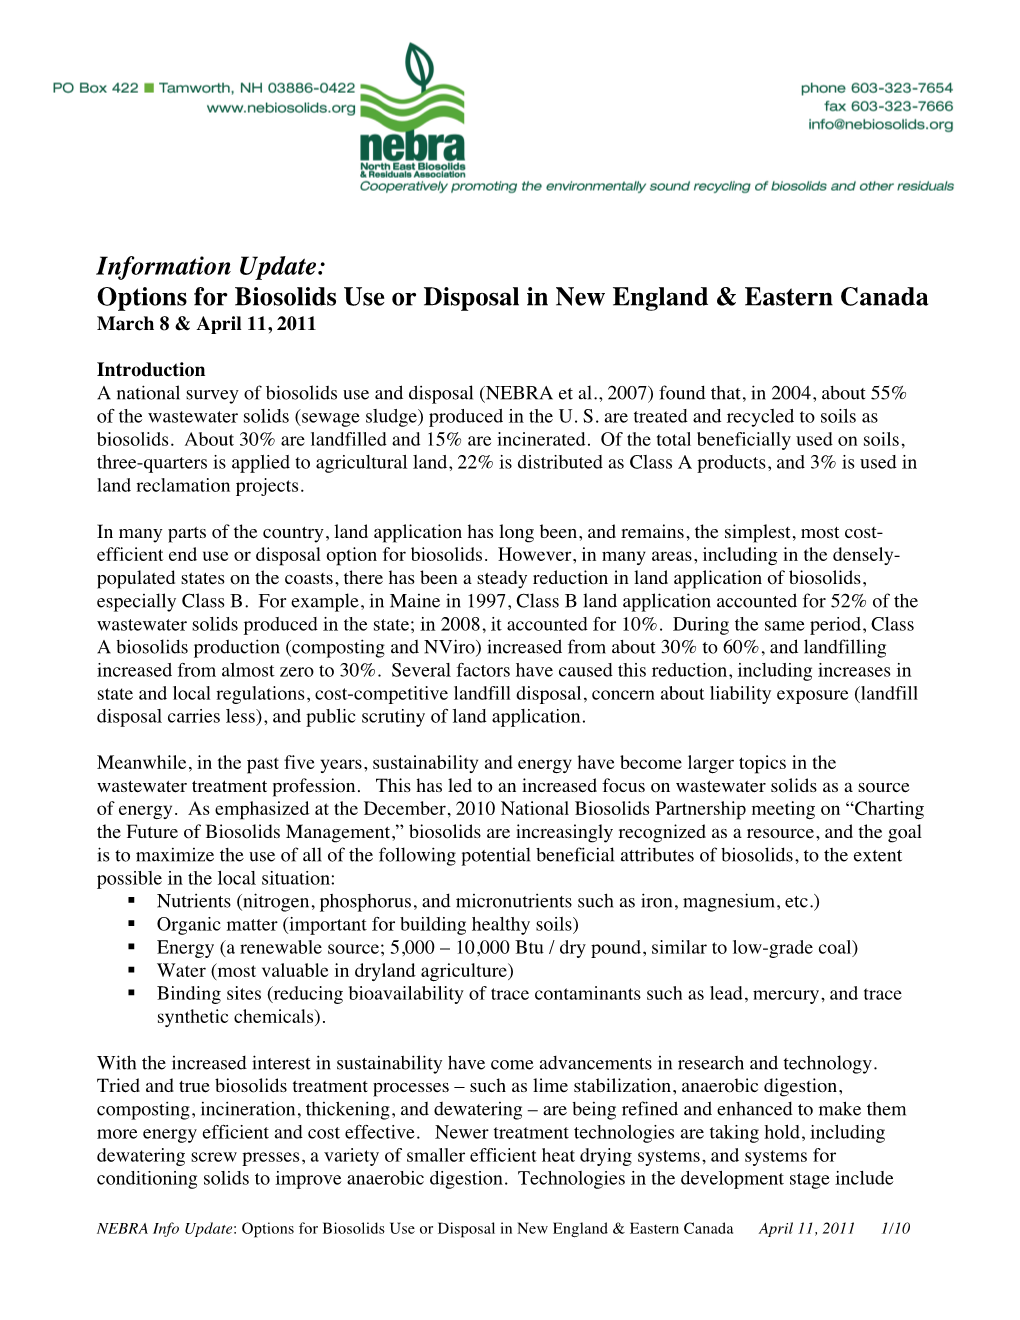 Information Update: Options for Biosolids Use Or Disposal in New England & Eastern Canada